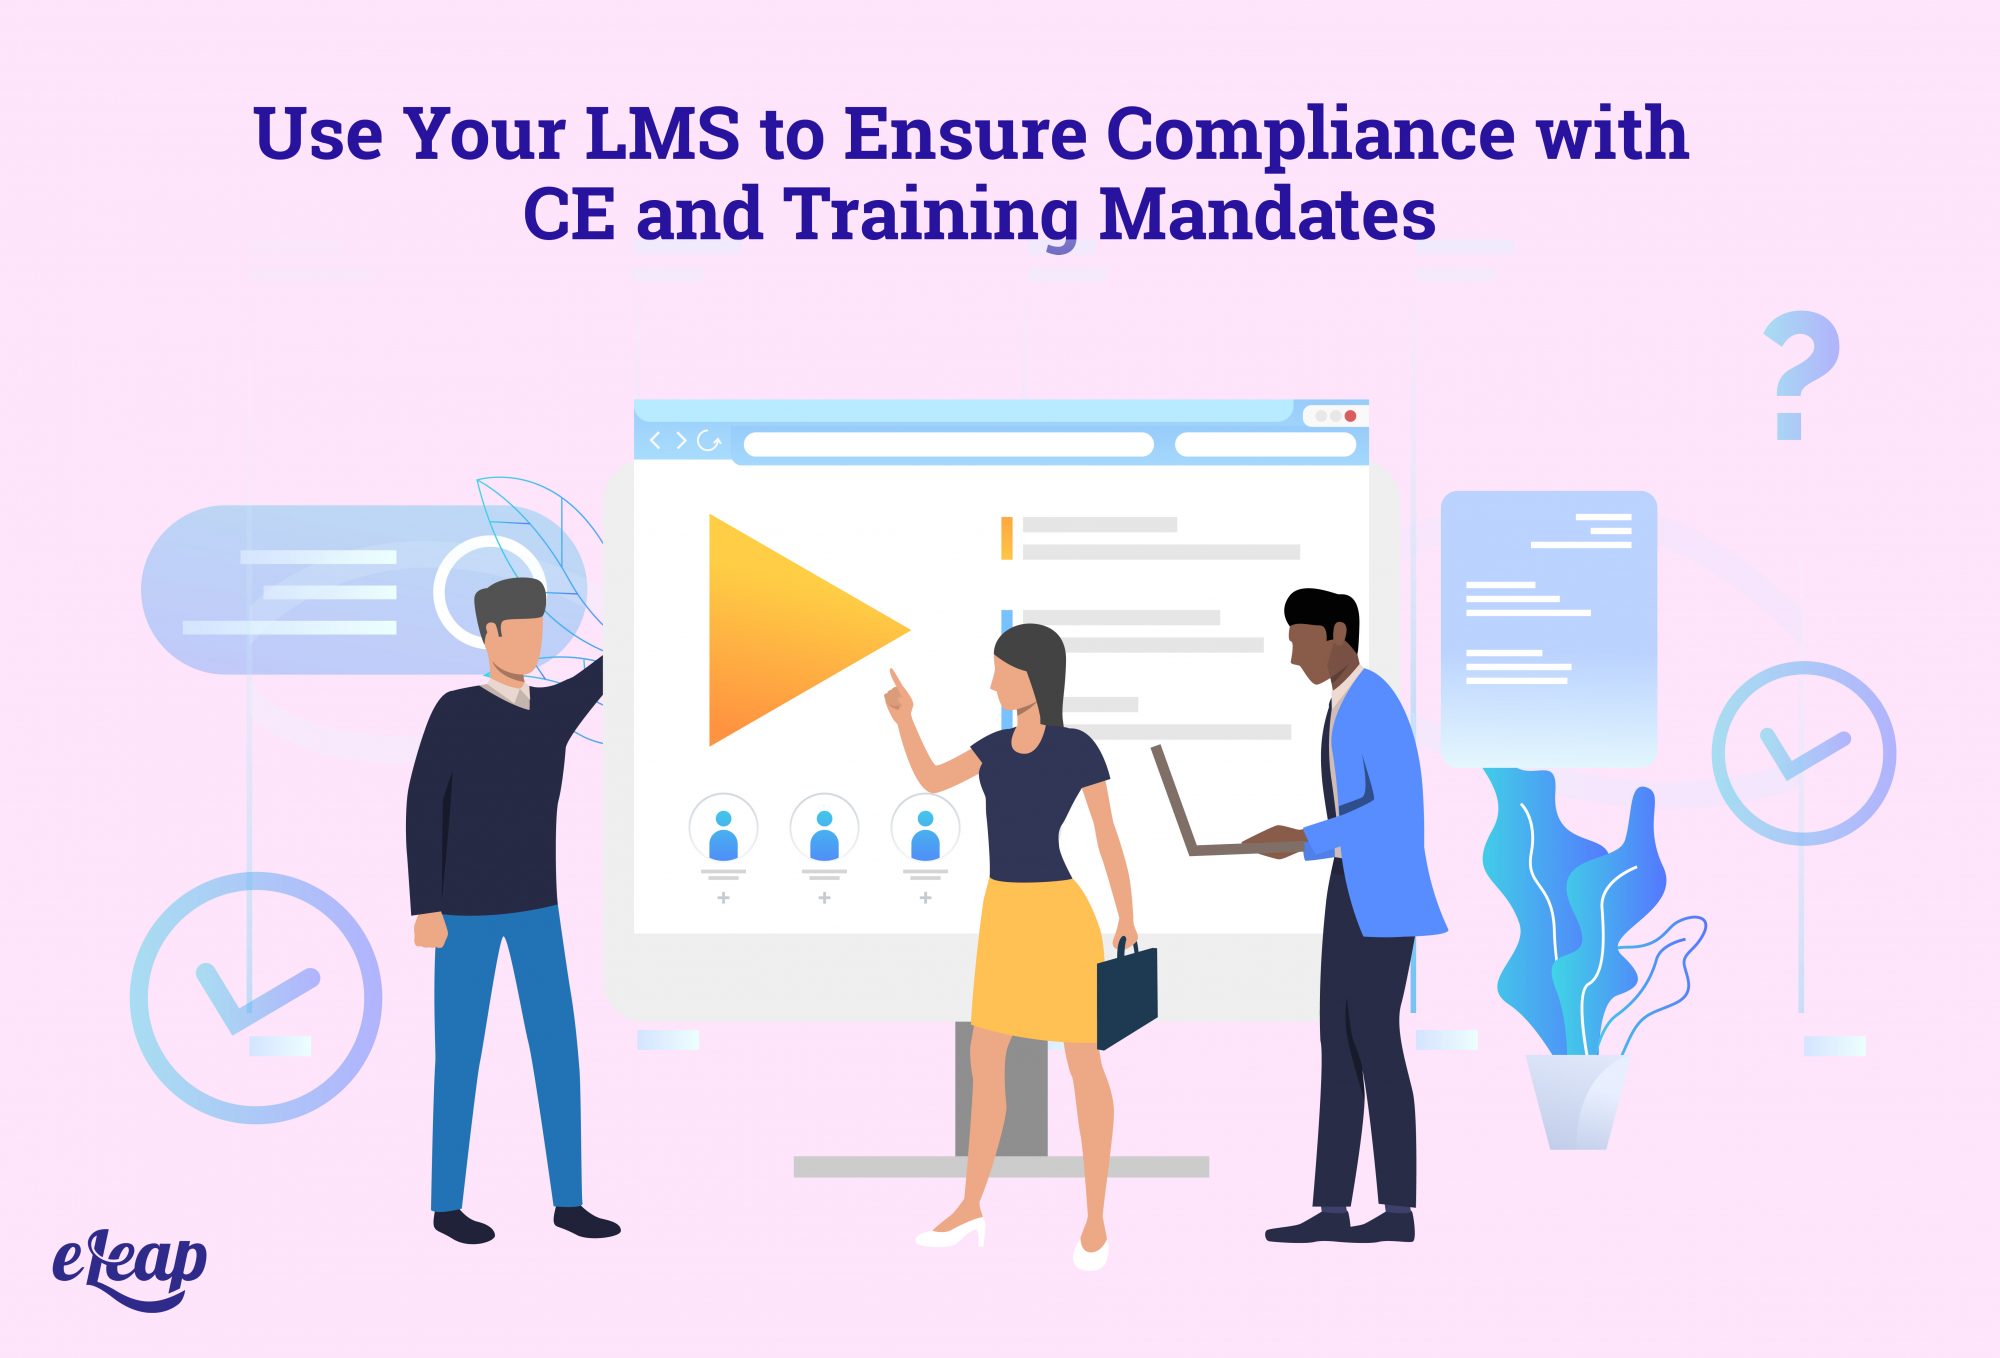 Use Your LMS to Ensure Compliance with CE and Training Mandates